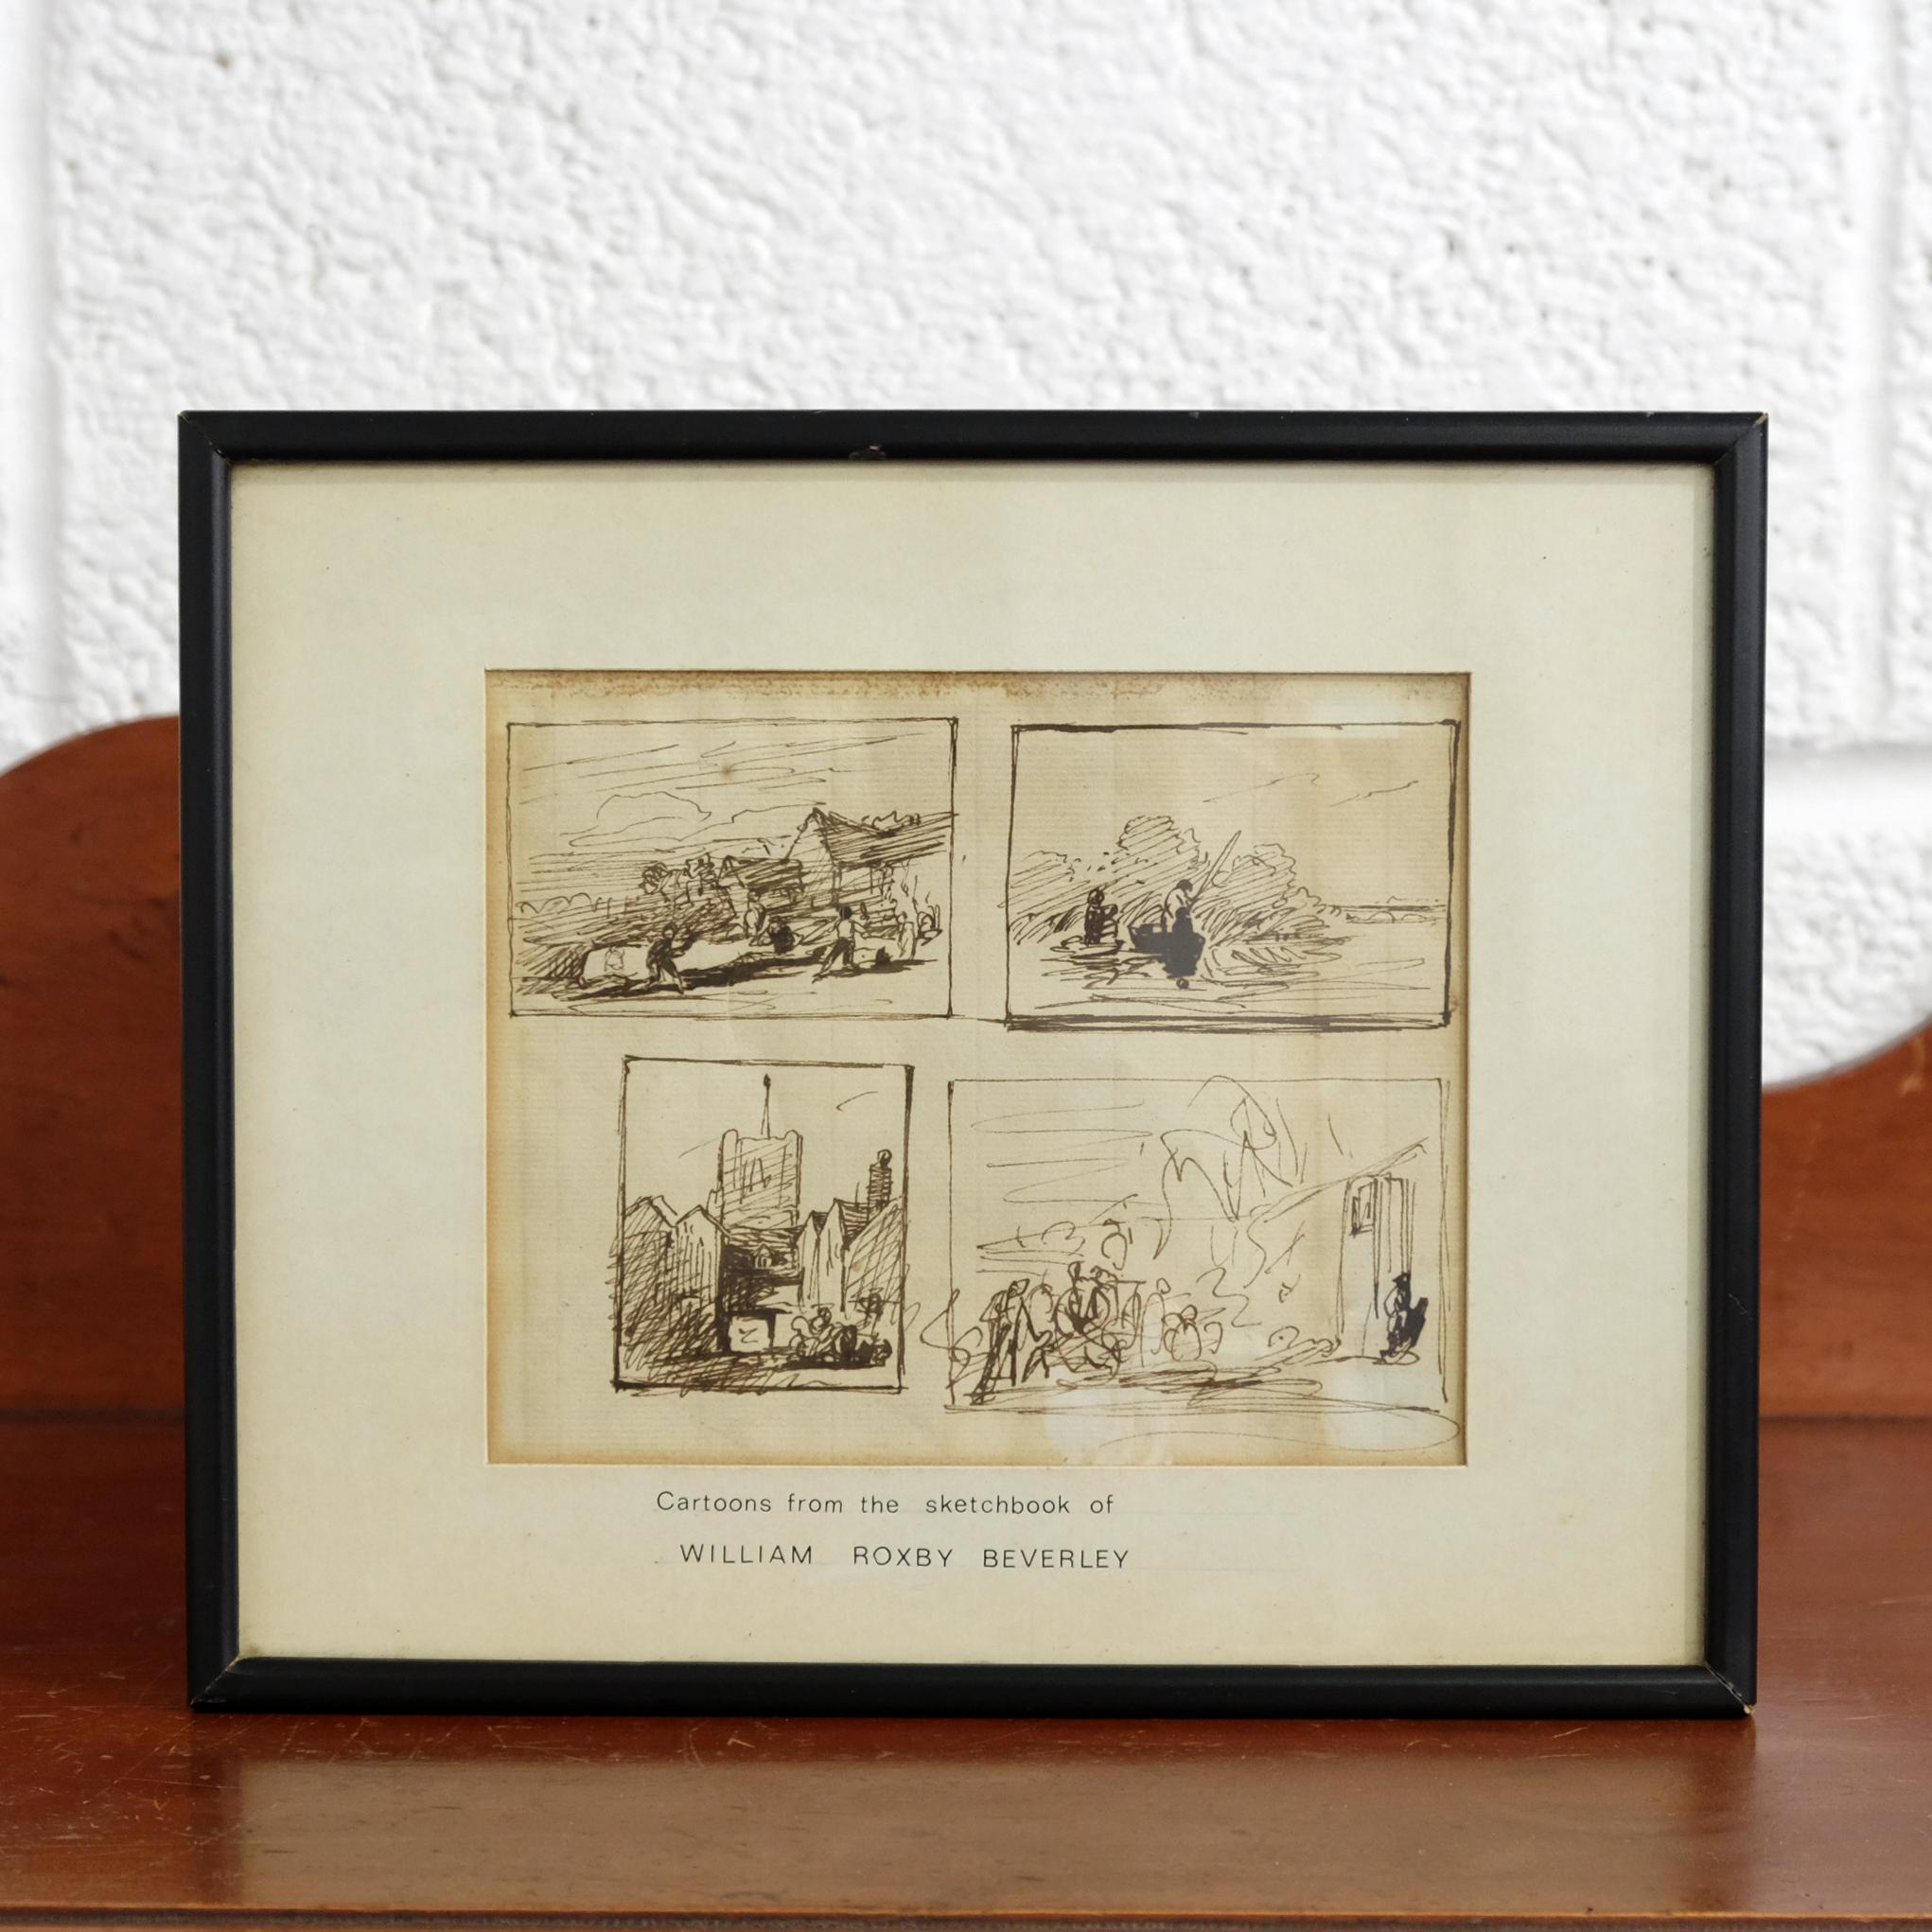 English Rare Original Framed Sketches Roxby Beverley 19th Century Theatrical Scene Art For Sale